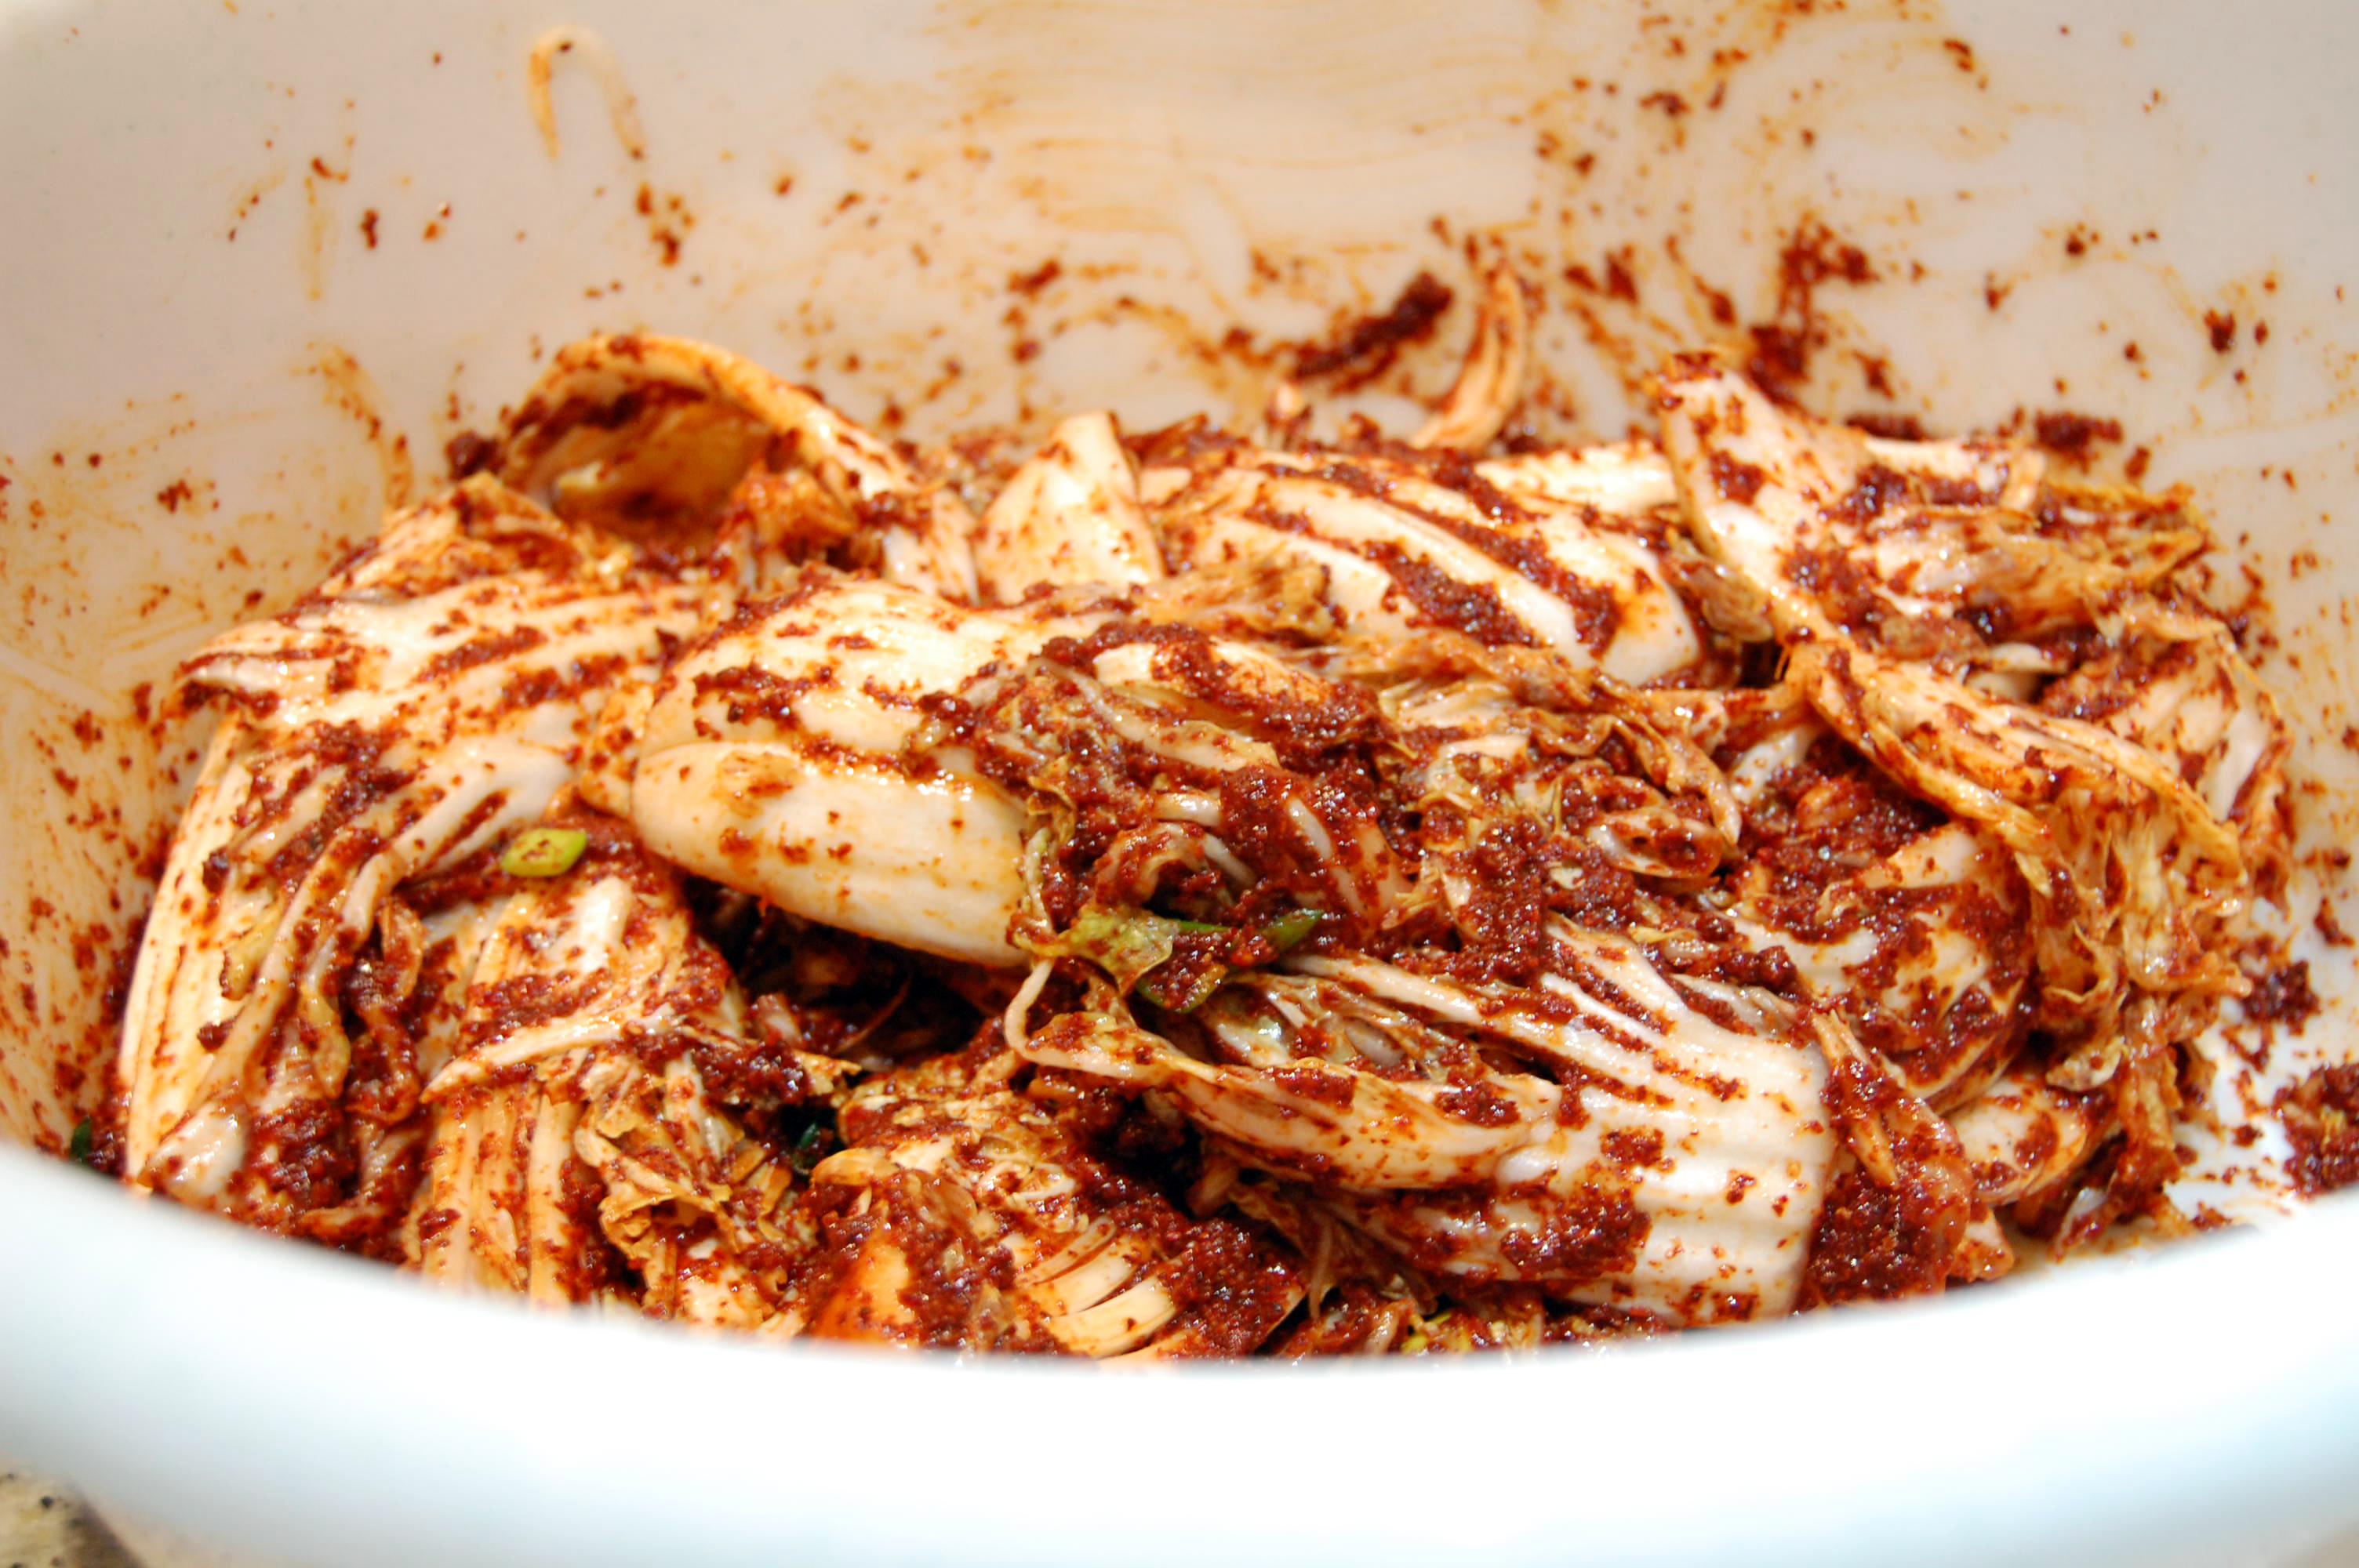 Cabbage leaves covered with kimchi paste rest in a large bowl.